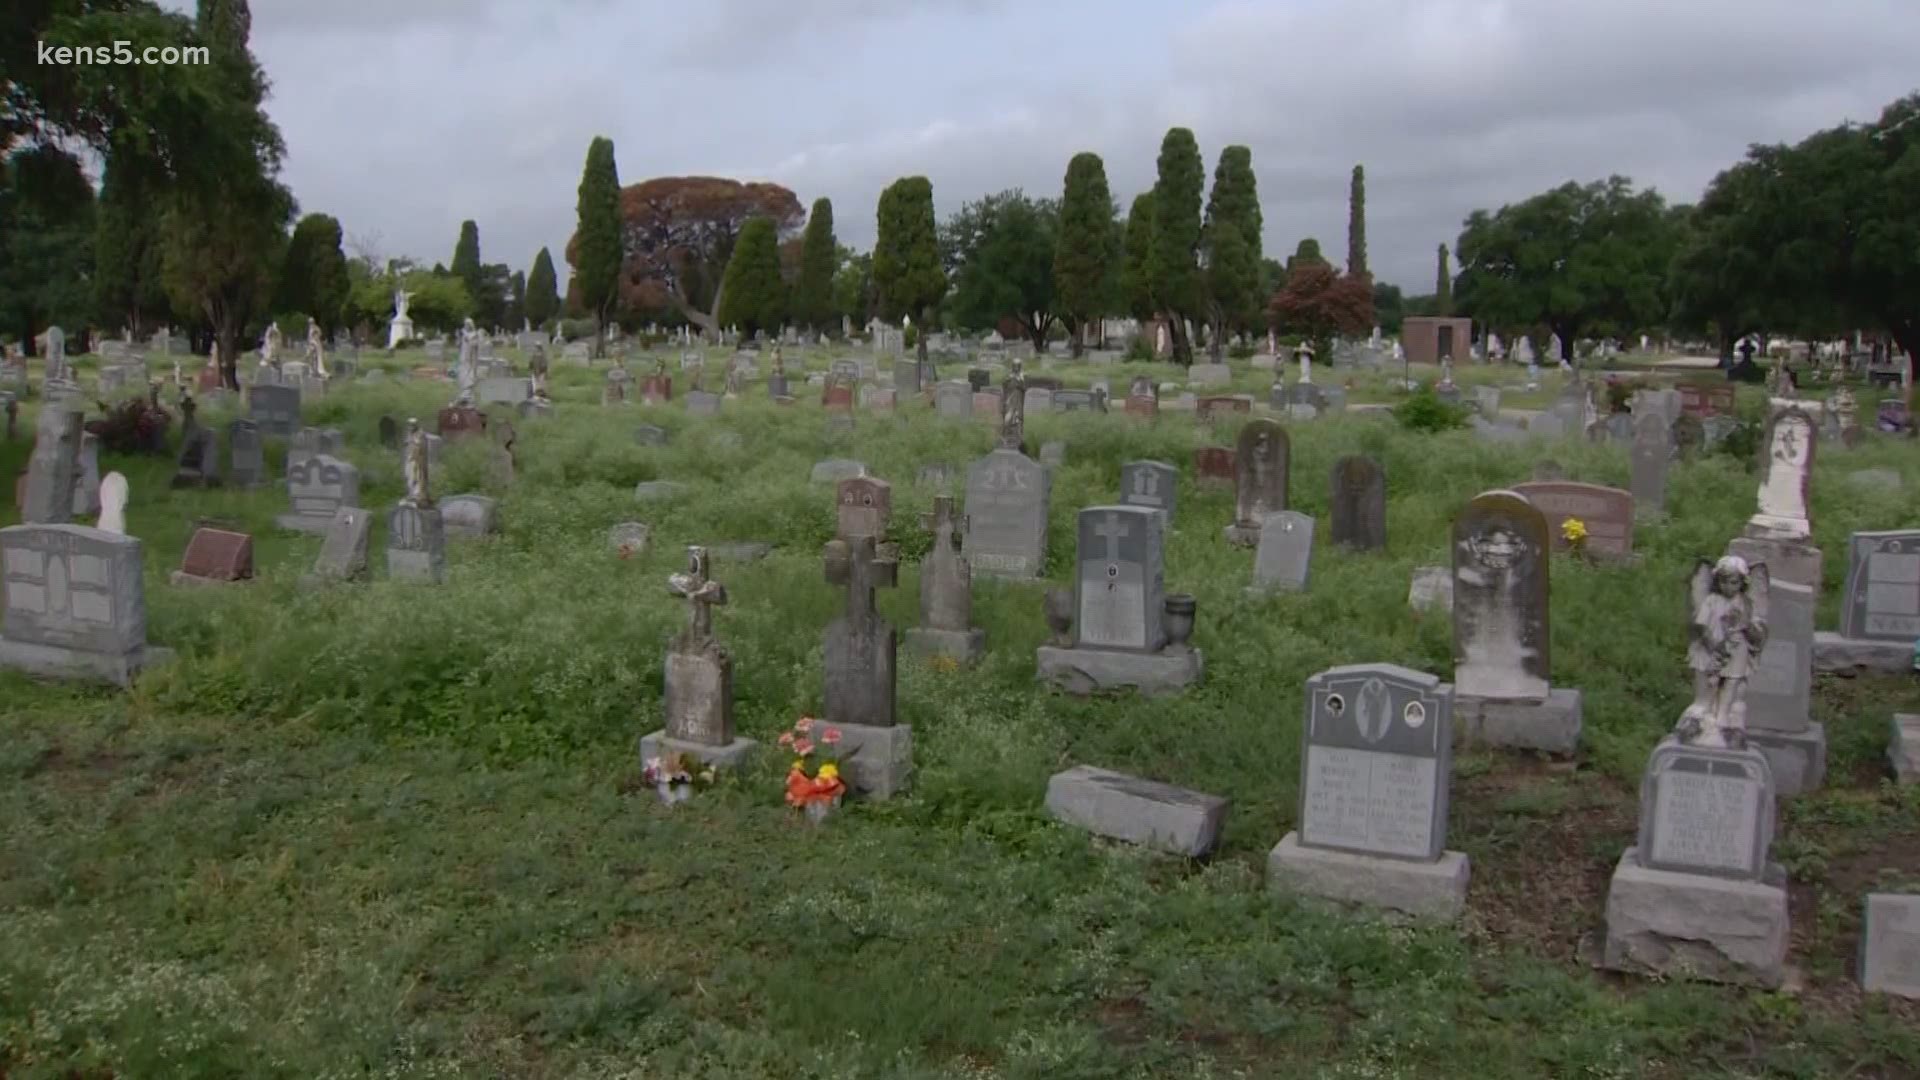 Many headstones at San Fernando Cemetery 3 are surrounded by tall grass and weeds, but the San Antonio Archdiocese says they are working on regular maintenance.